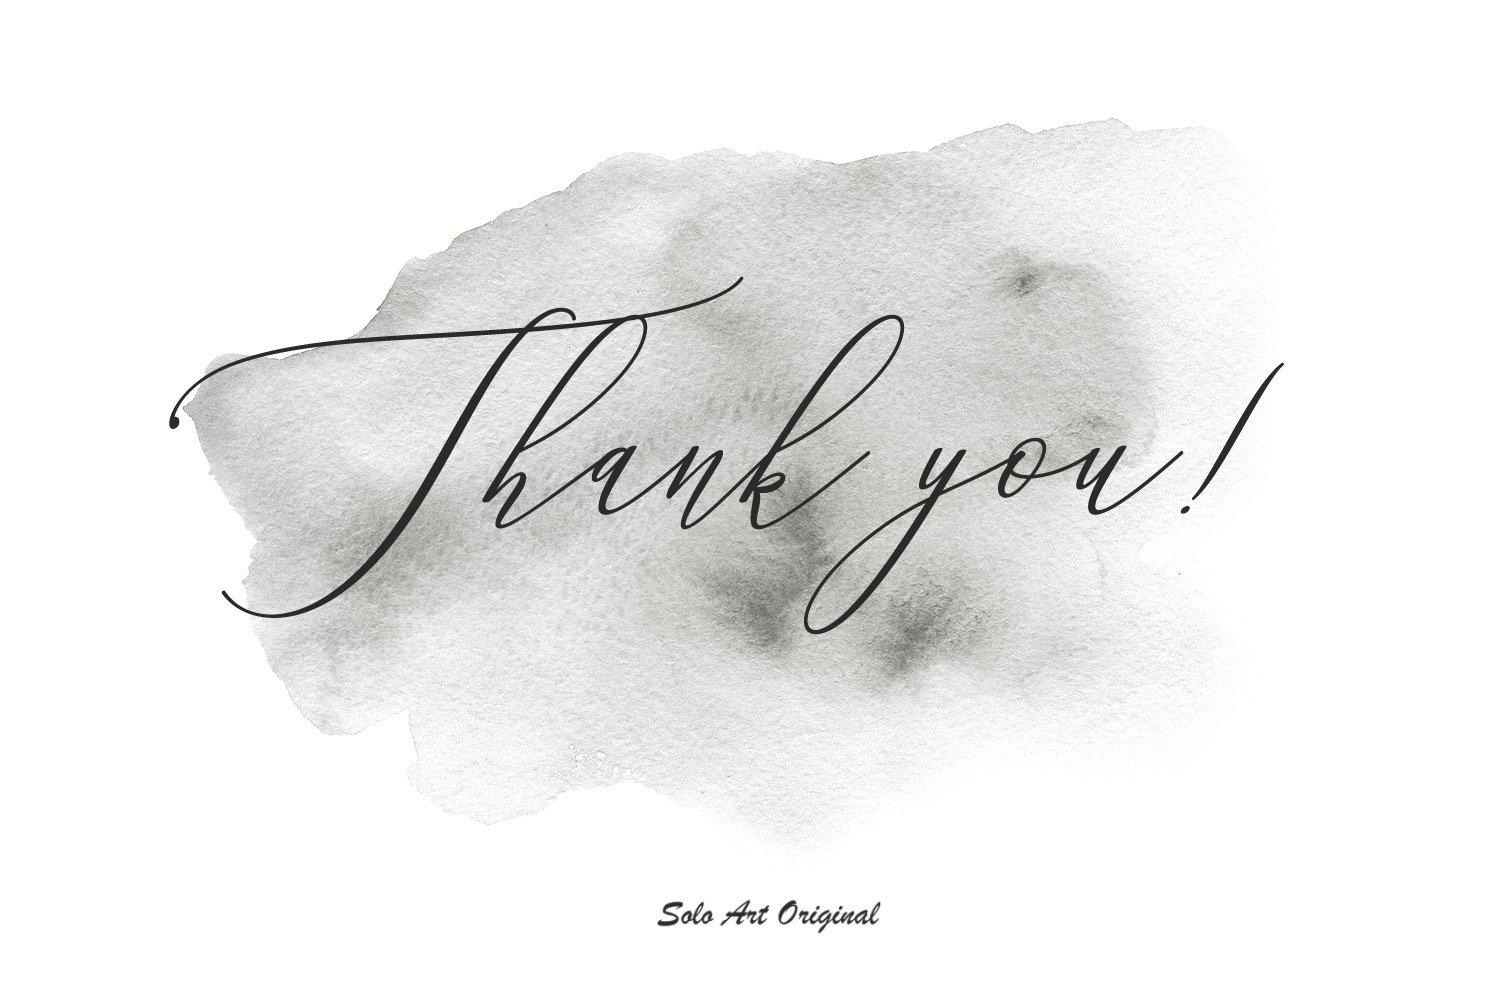 Thanks lettering on a grey brush.